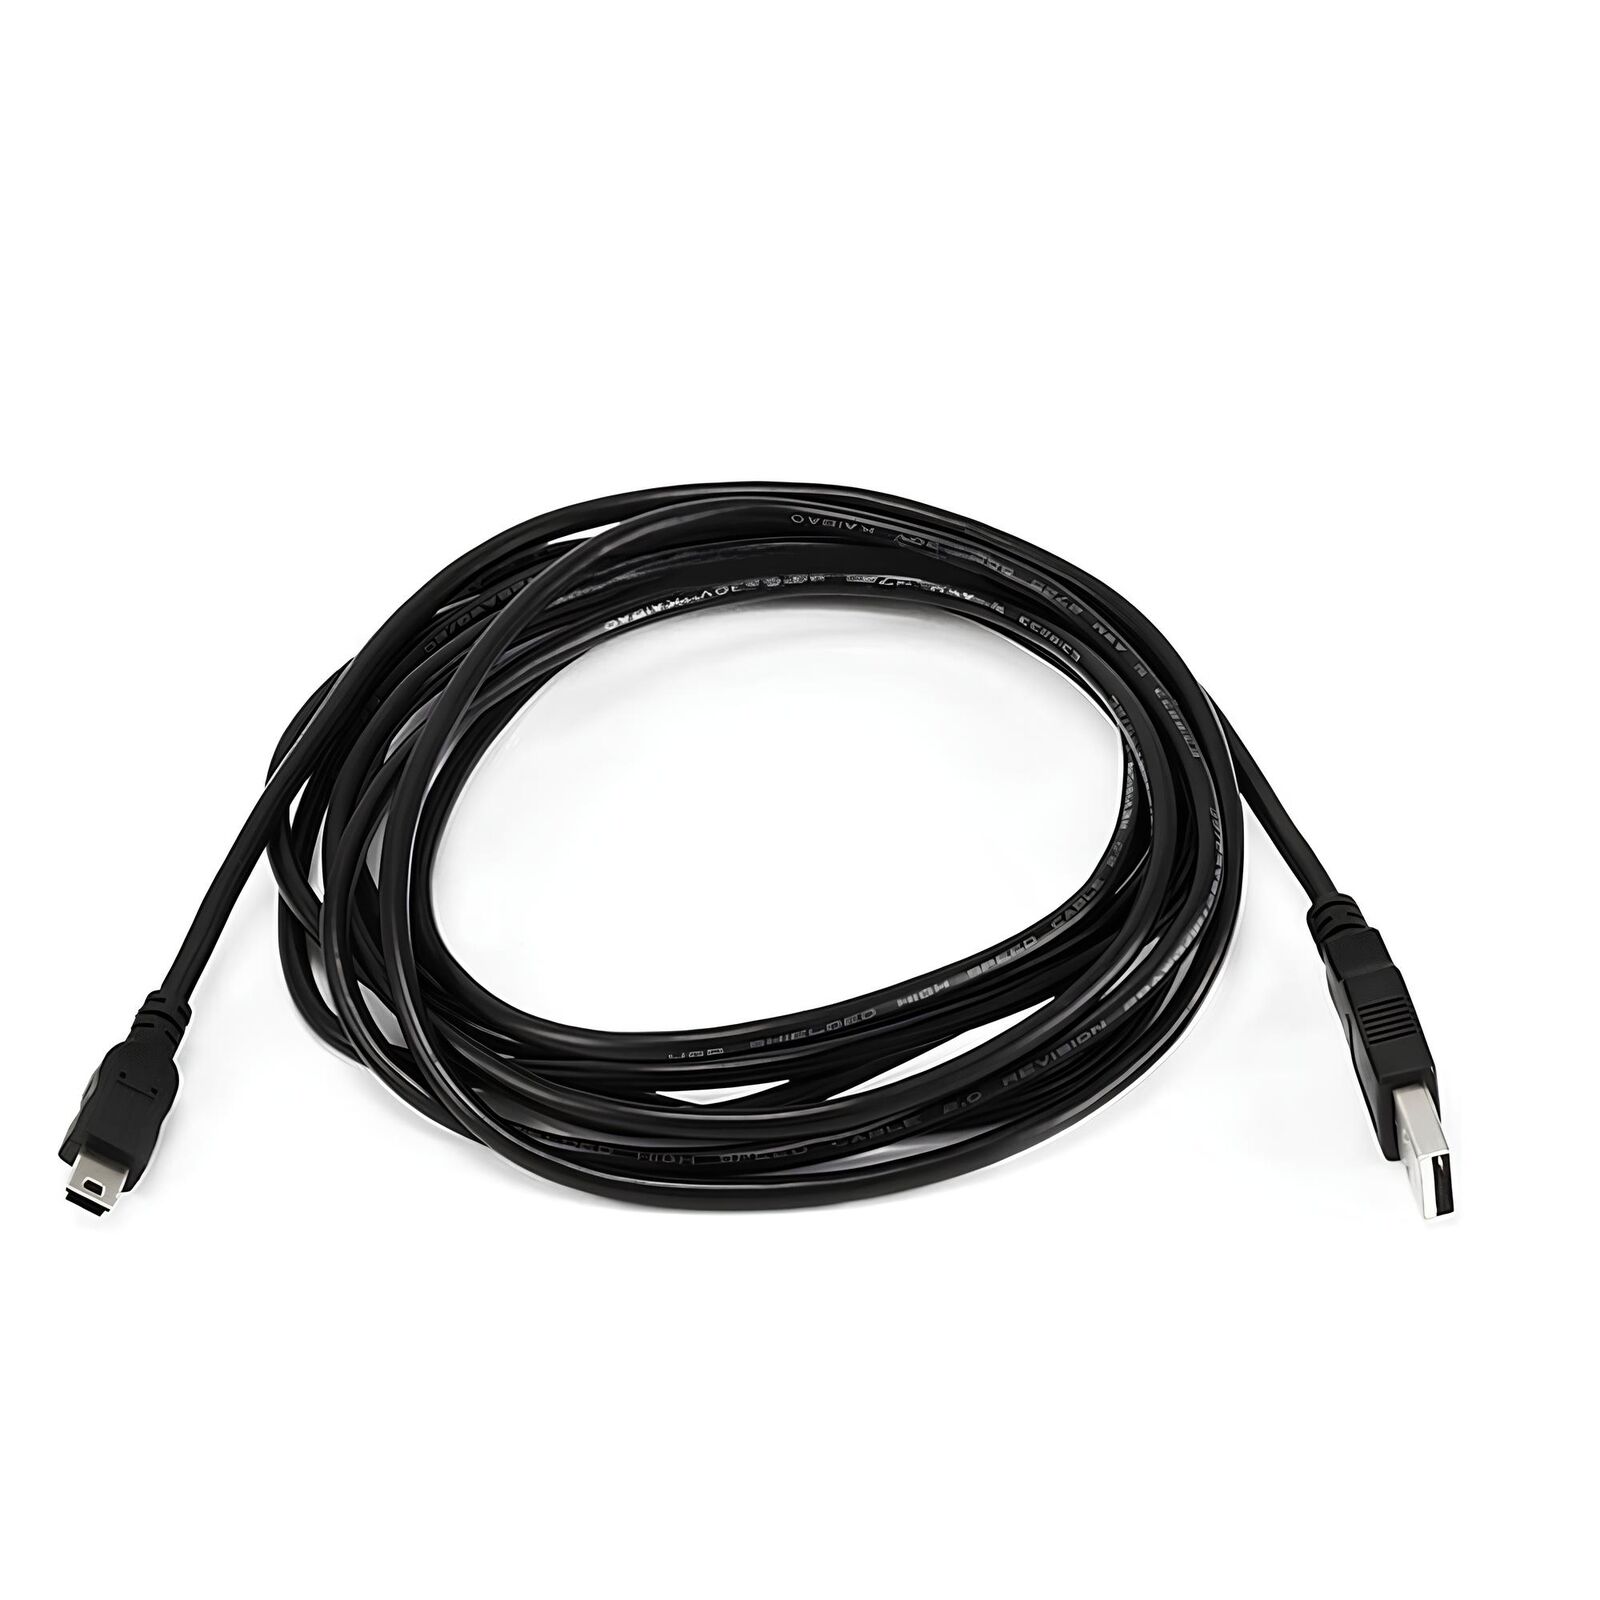 DATACABLE10FT USB-A to Mini USB Data Transfer Cable, 10ft.